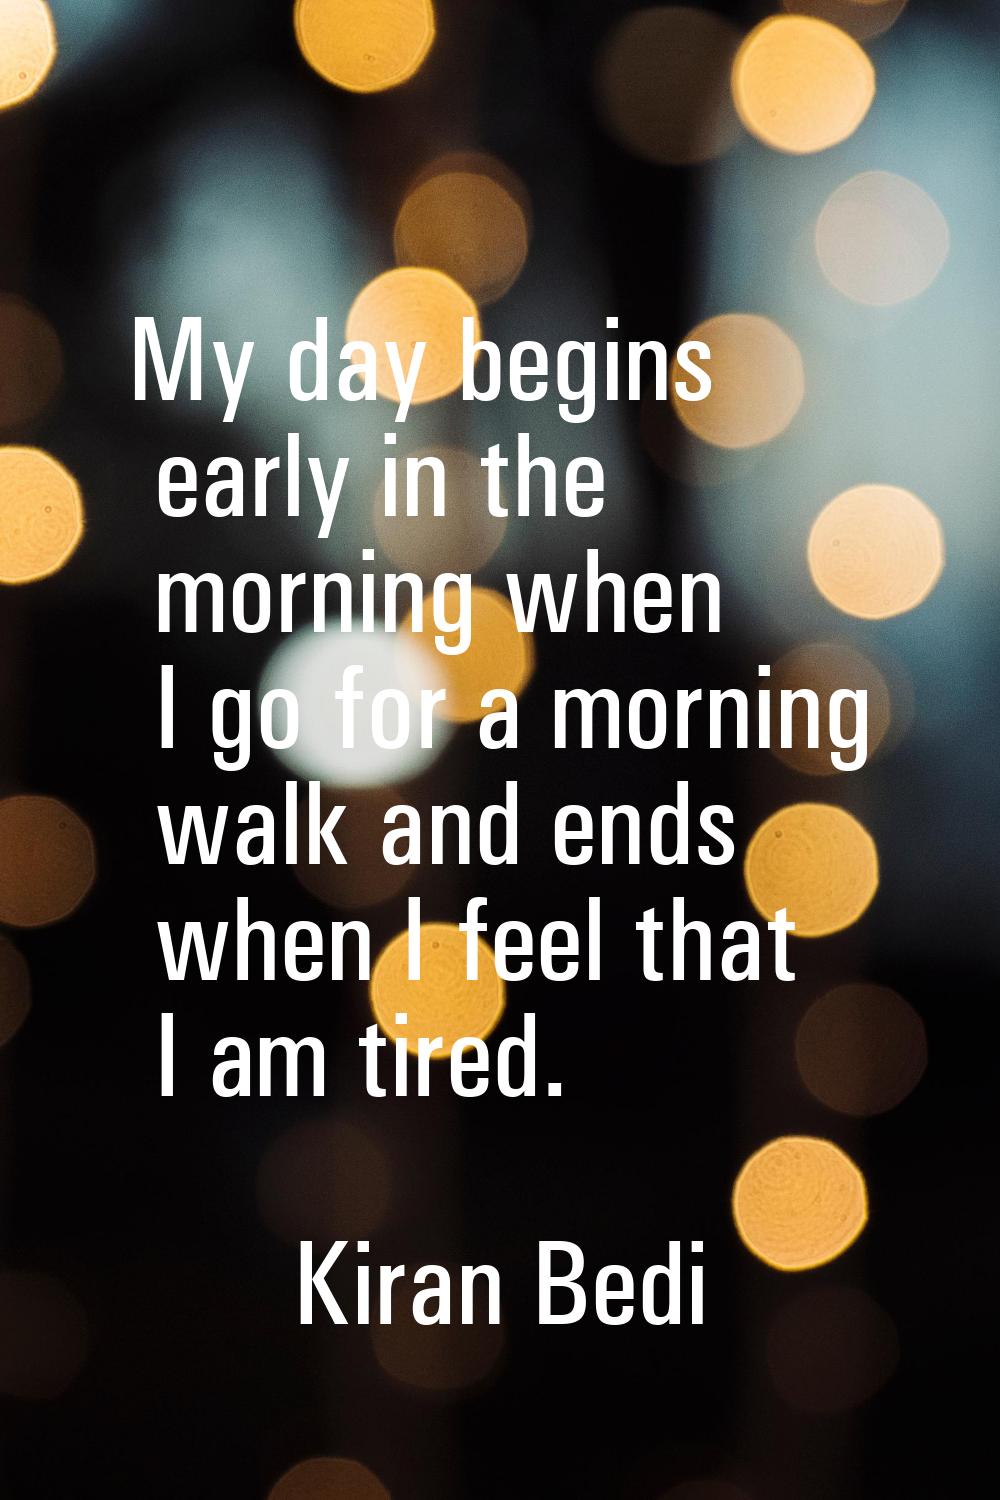 My day begins early in the morning when I go for a morning walk and ends when I feel that I am tire